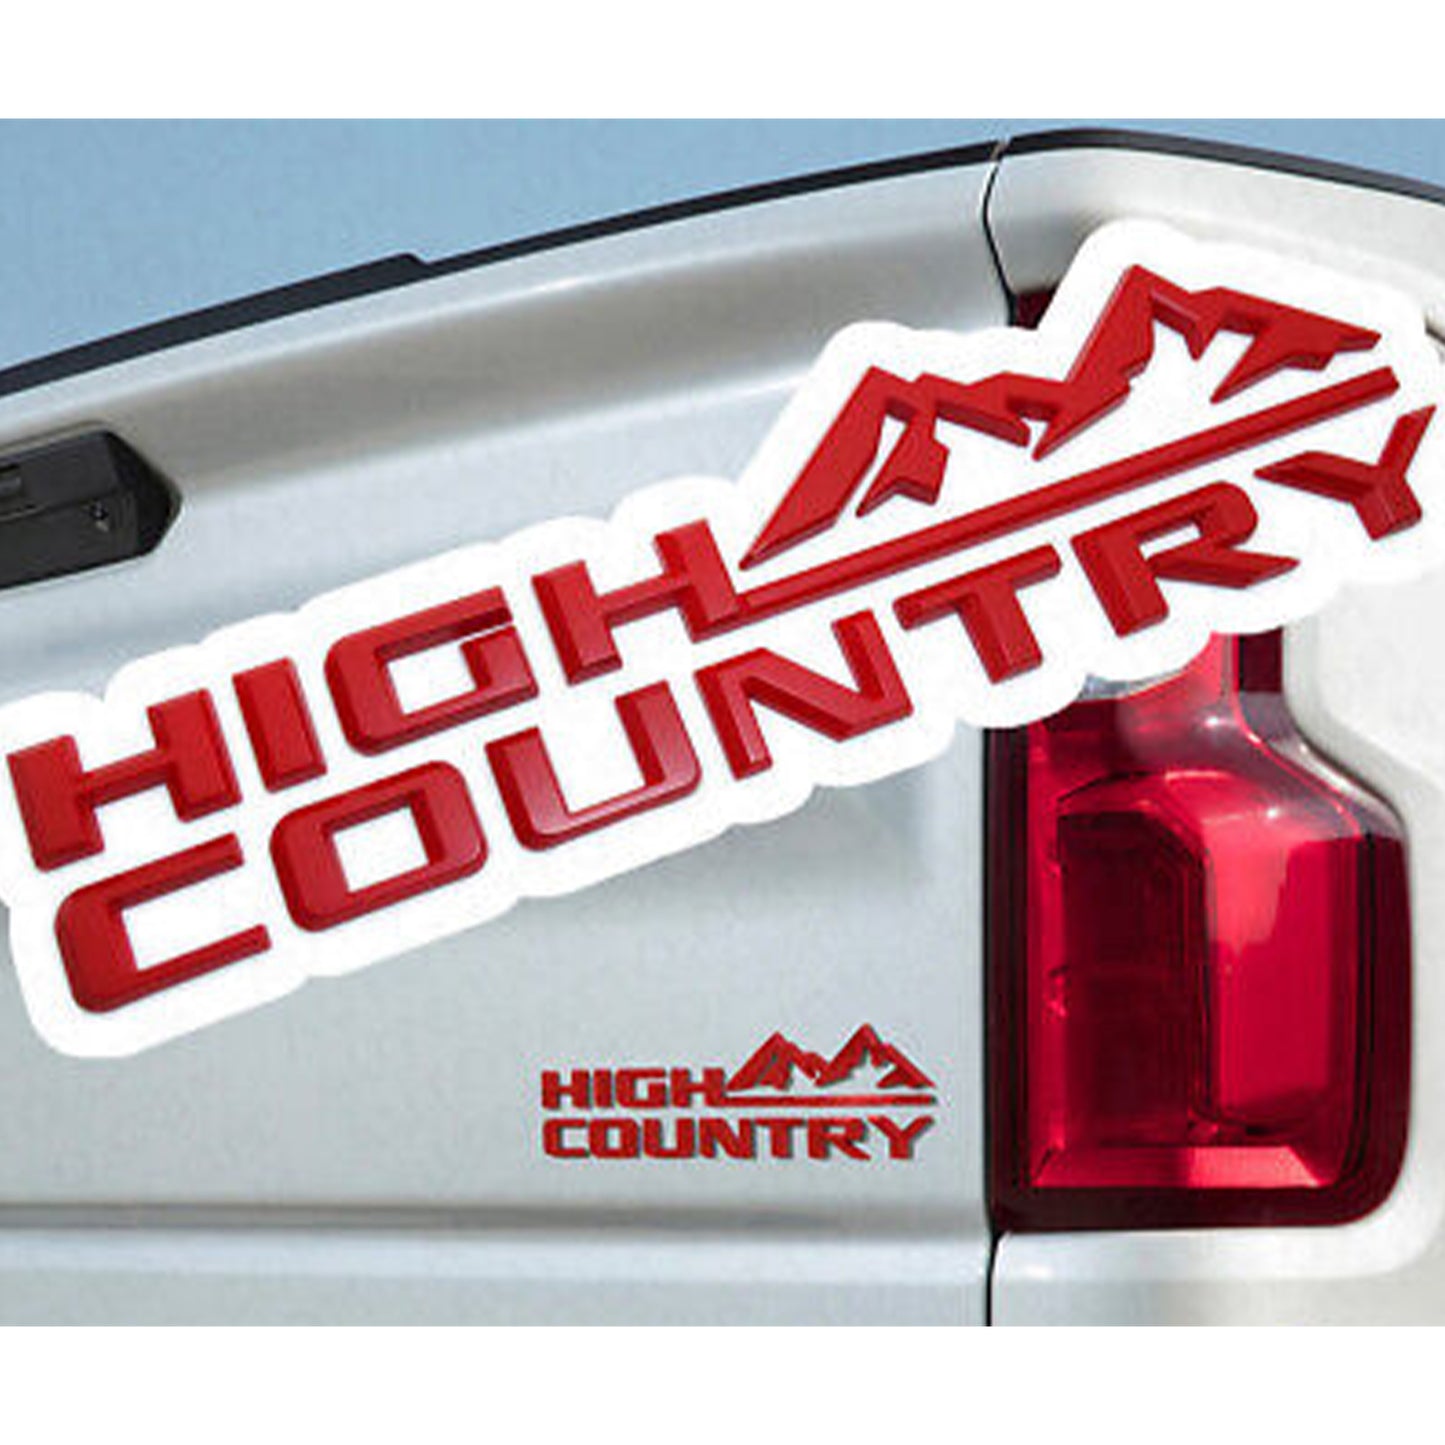 Chevrolet Chevy Tahoe Silverado High Country Fender Letter Logo Emblem Badge 2x 19-21 Red